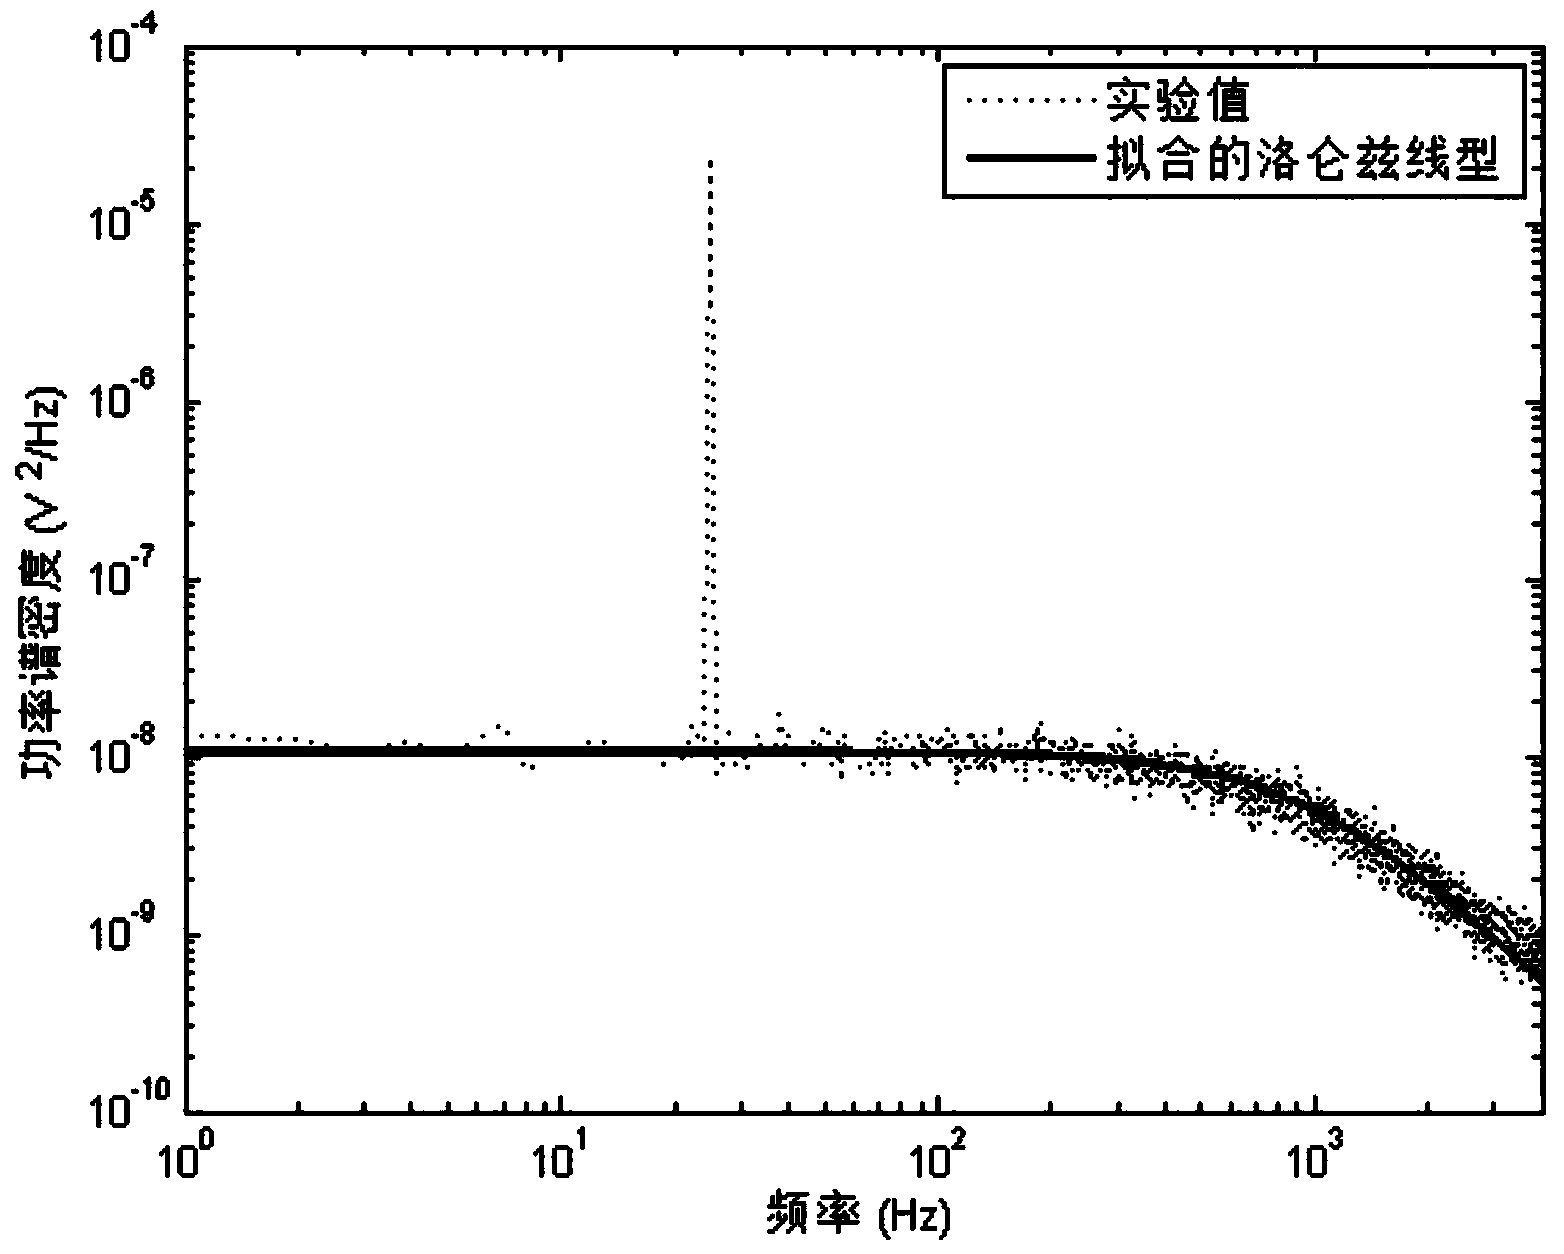 Particle diameter detection method based on optical trapping